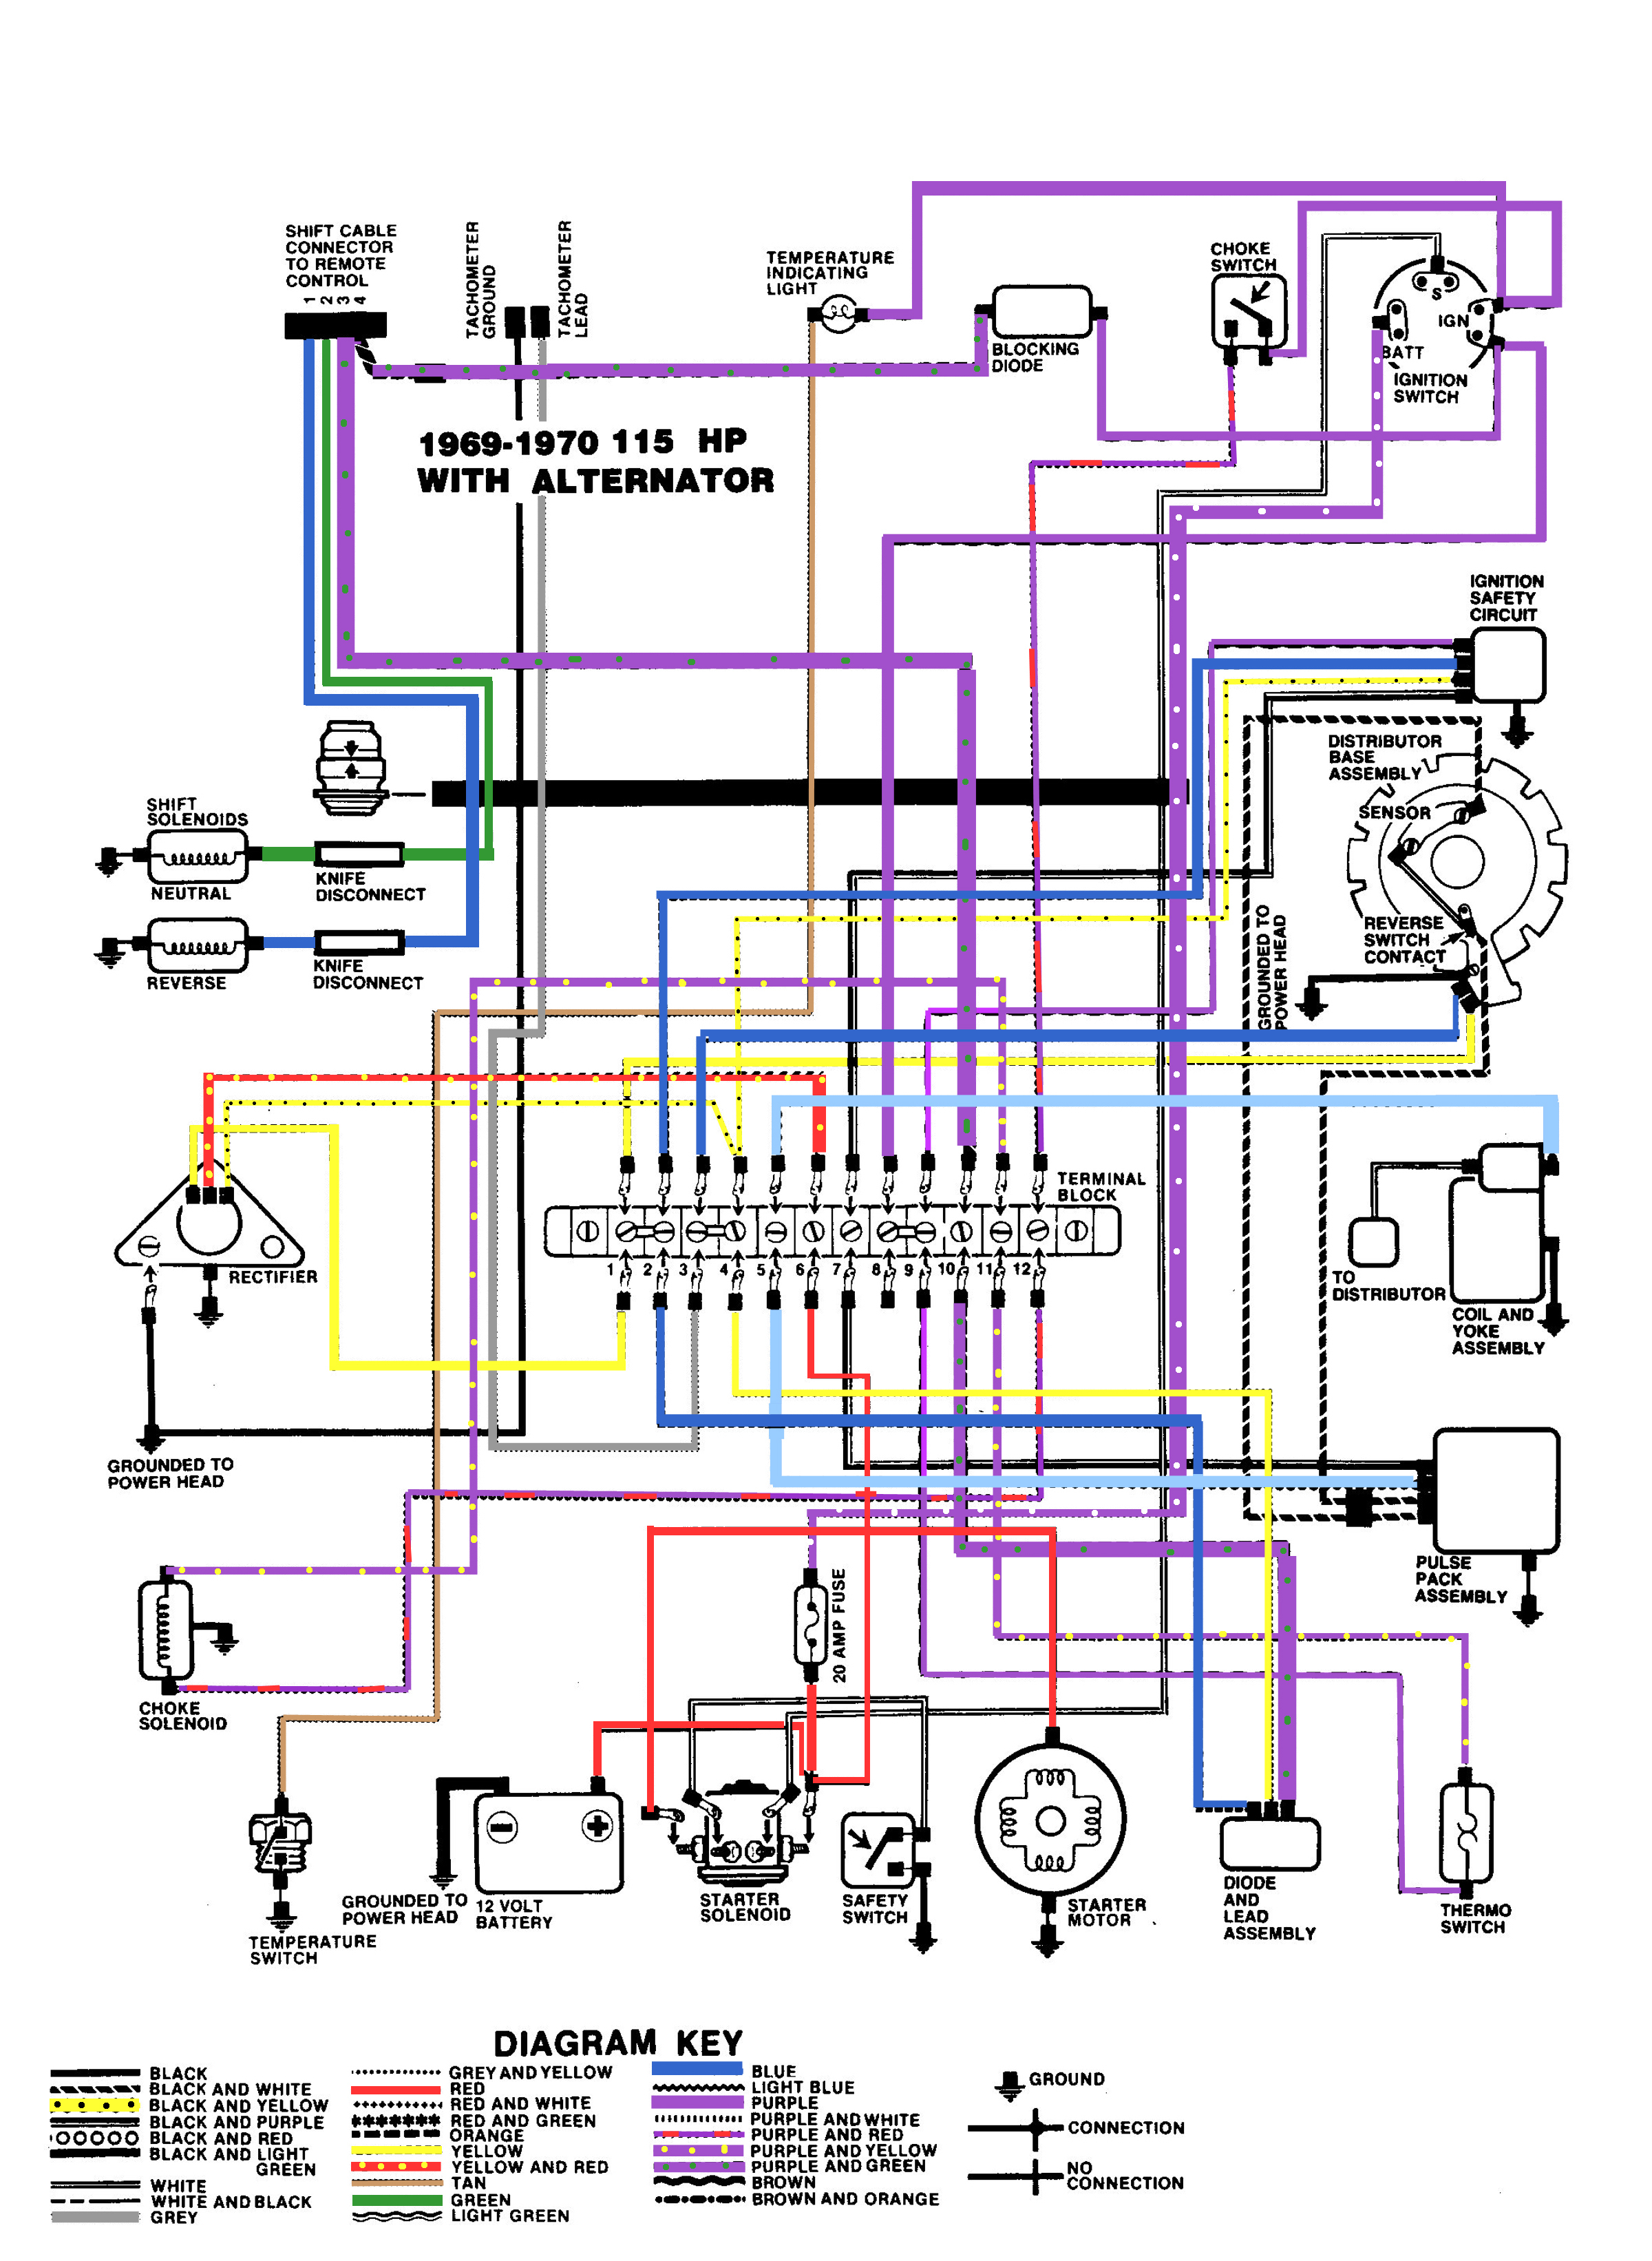 Omc Johnson Evinrude Ignition Switch Wiring Diagram | Wiring Diagram - Johnson Ignition Switch Wiring Diagram